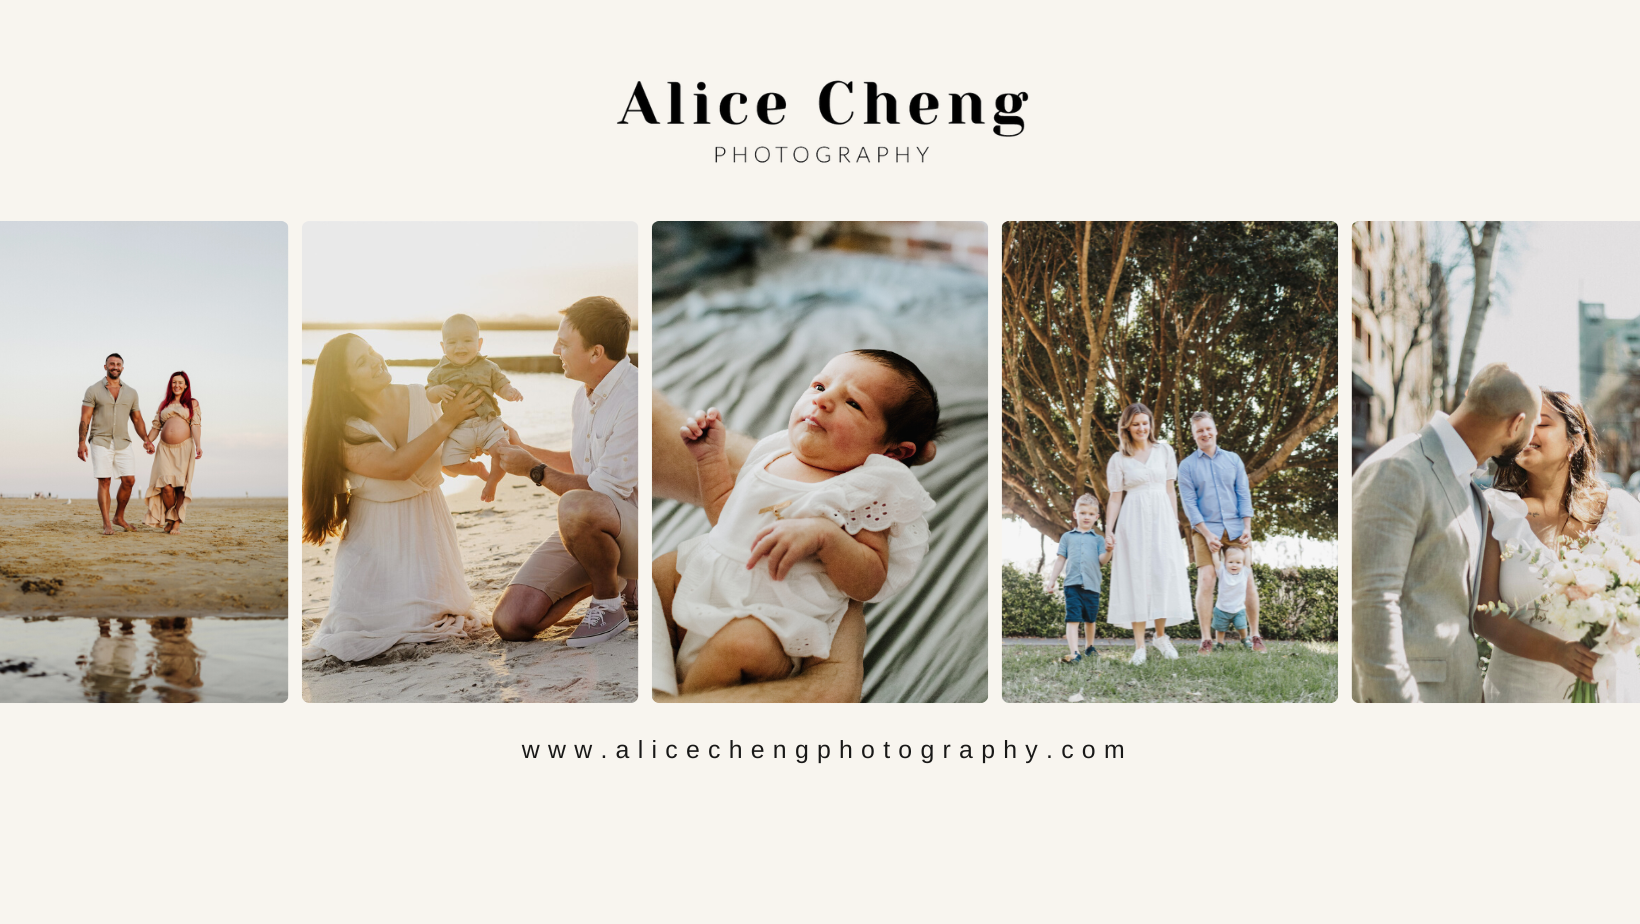 Alice Cheng Photography